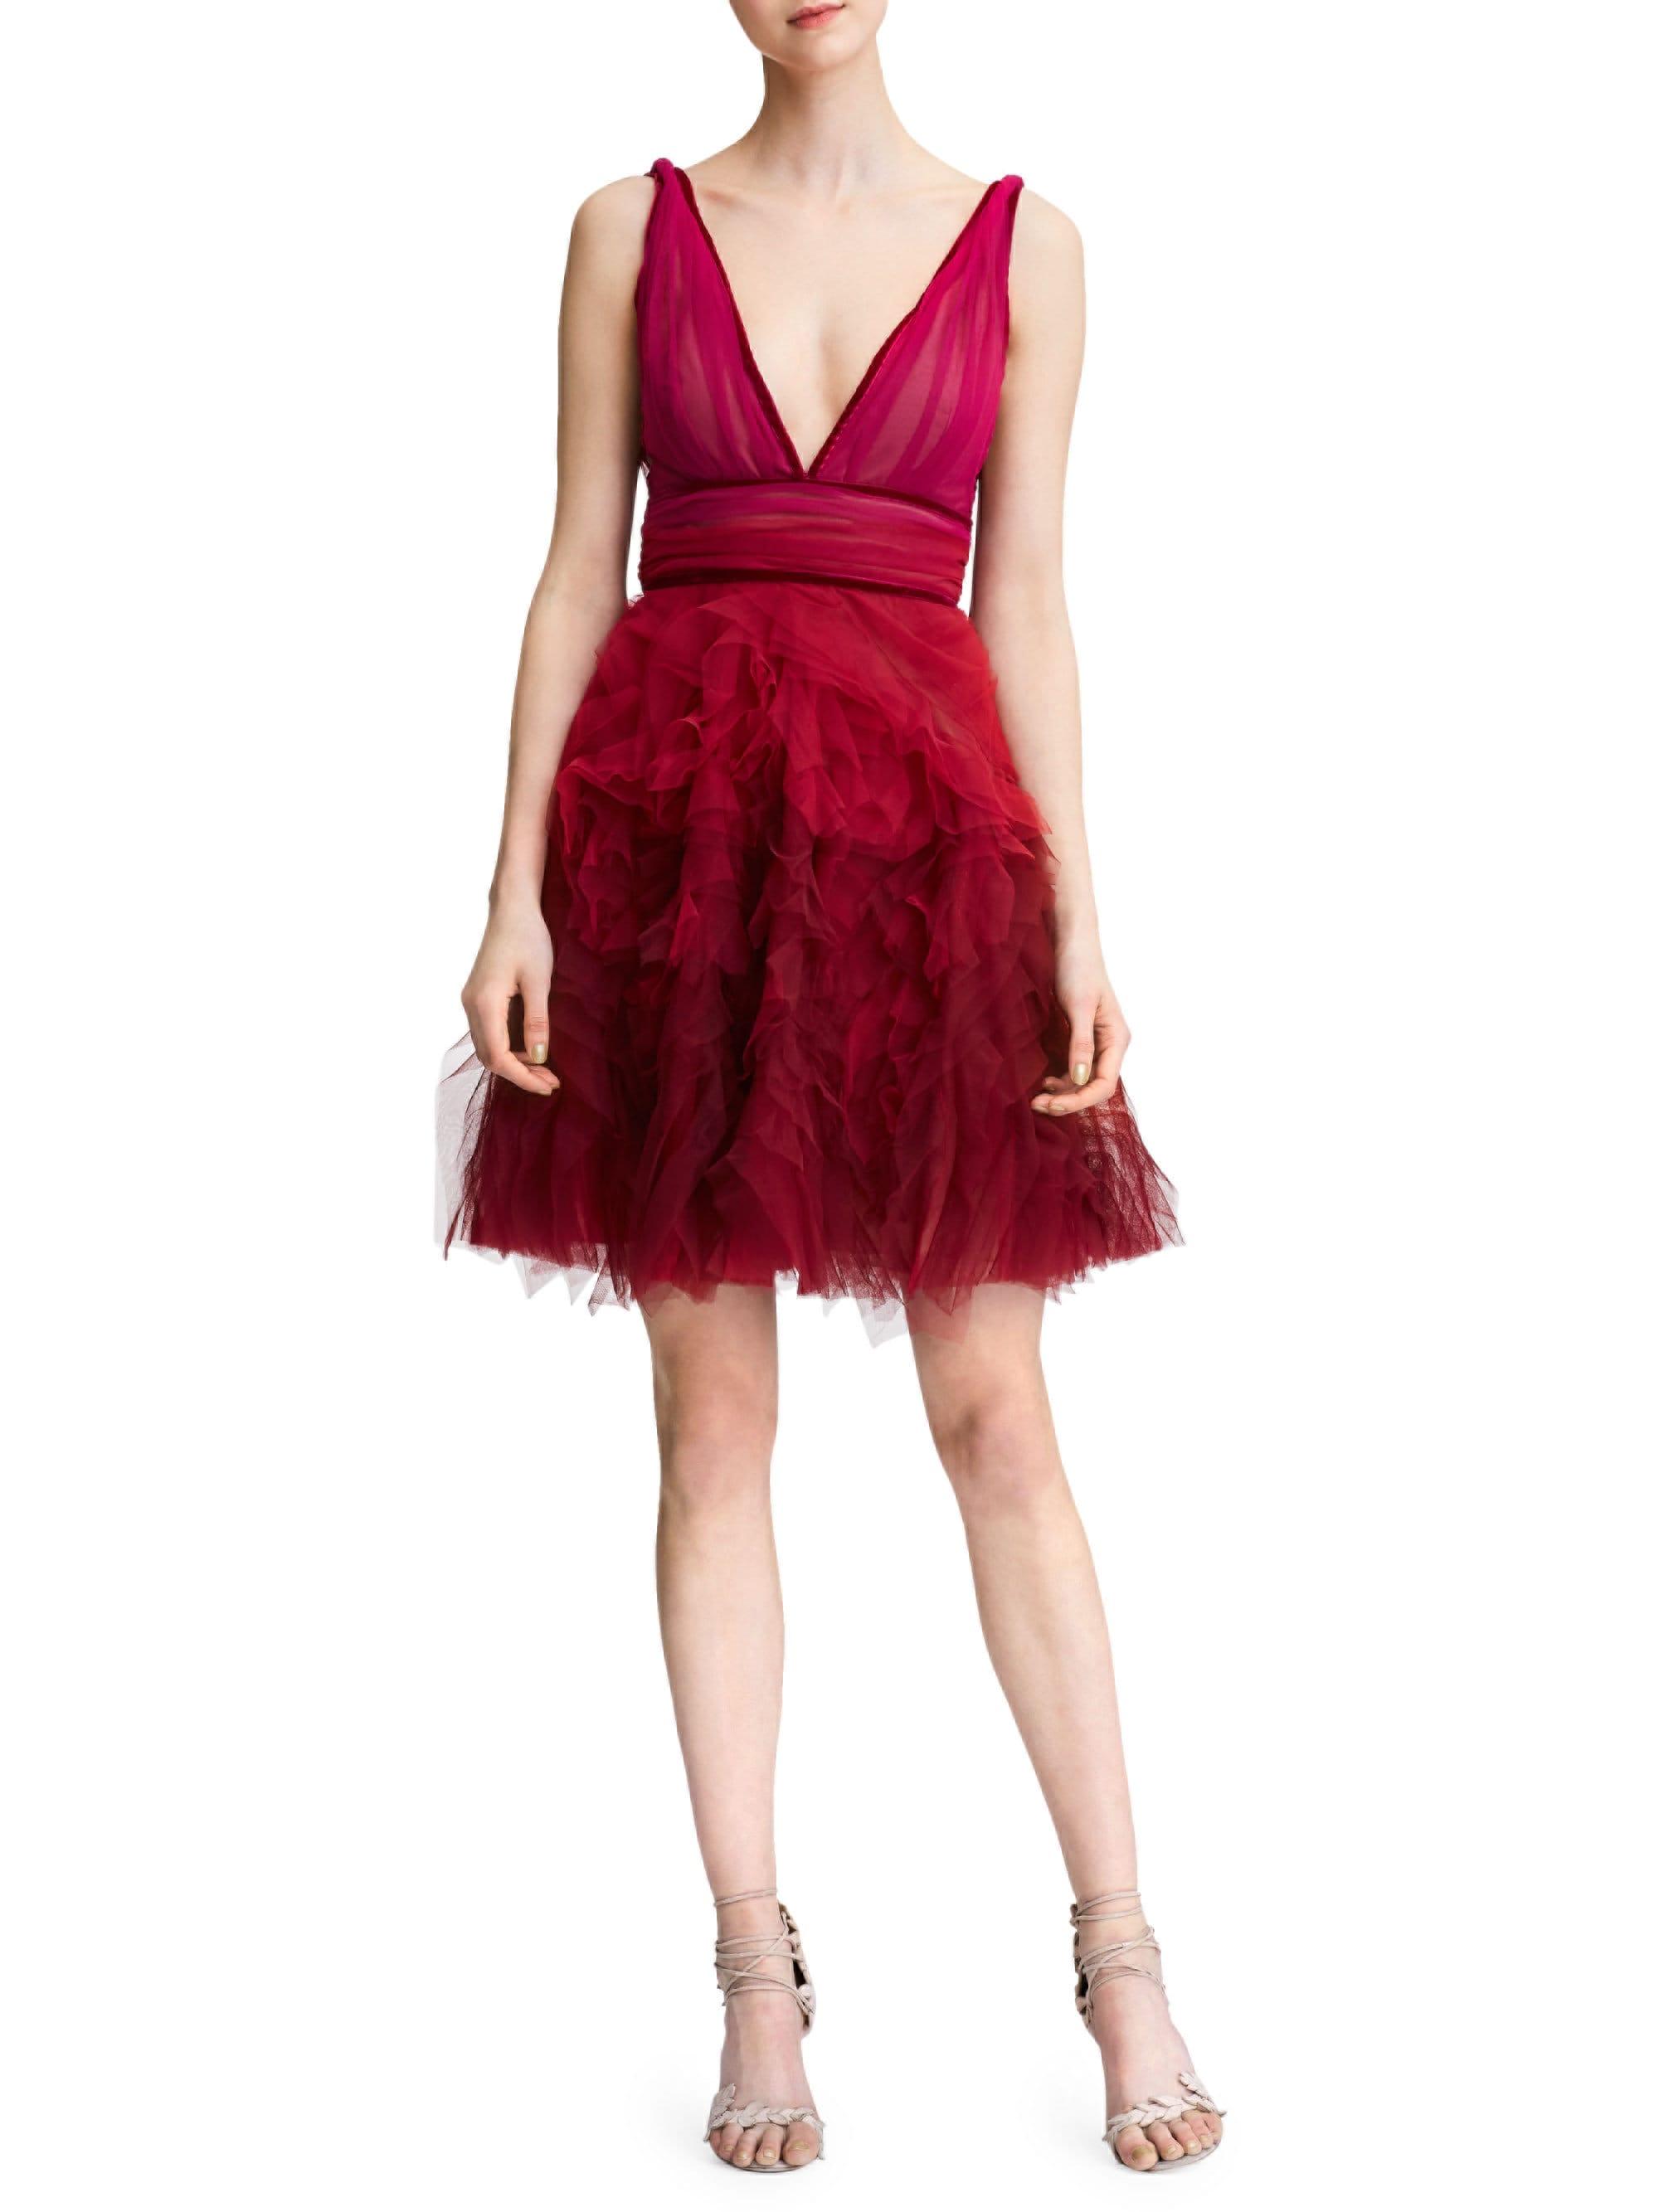 Lyst - Marchesa notte Fit-&-flare Tulle Cocktail Dress in Red